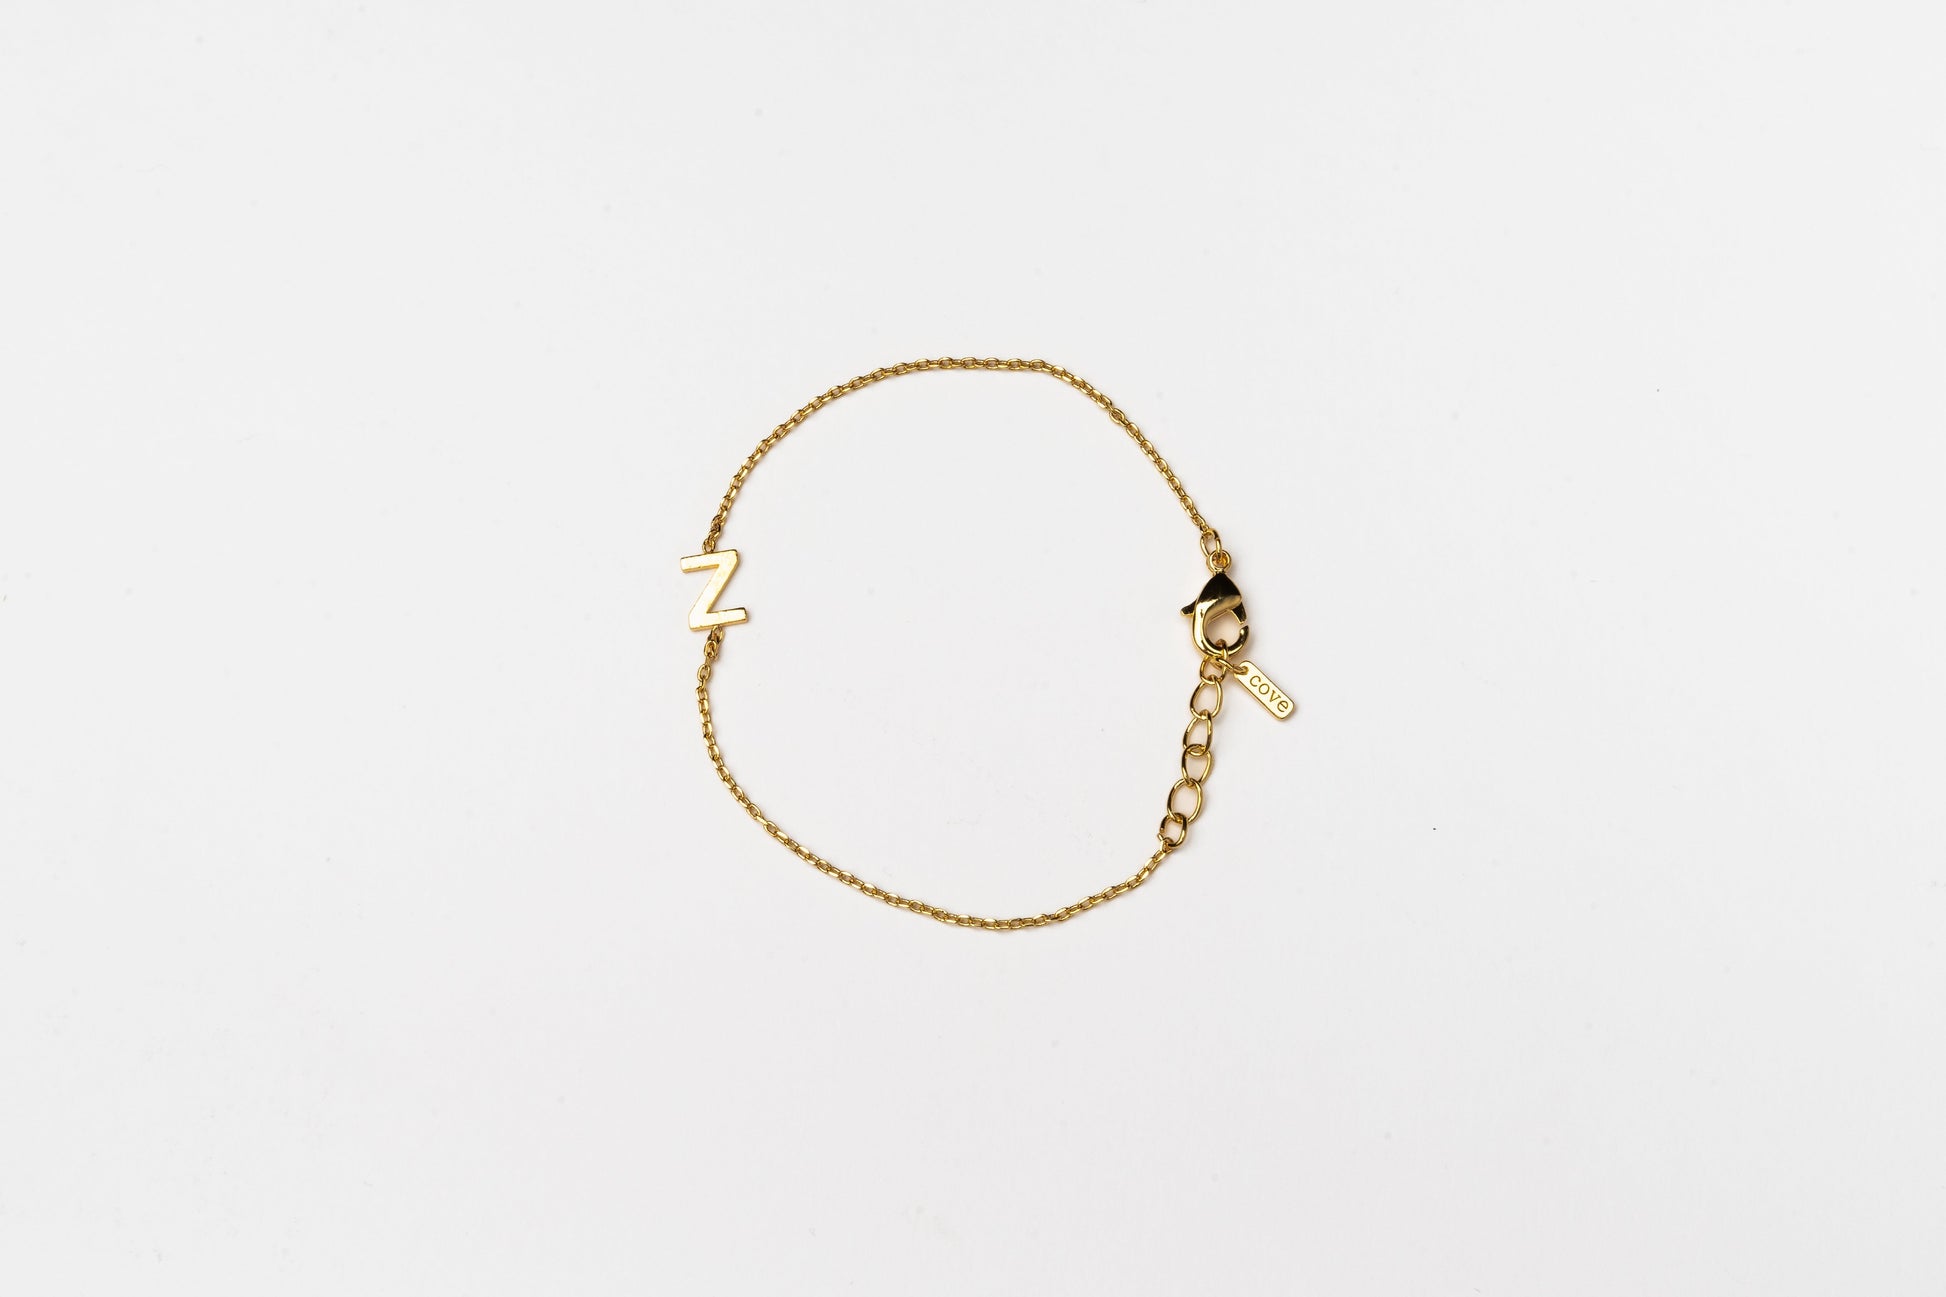 Cove Kid's Initial Bracelet KID'S BRACELET Cove Accessories 18k Gold Plated 1-4 Year/5" + 1/2" ext Z